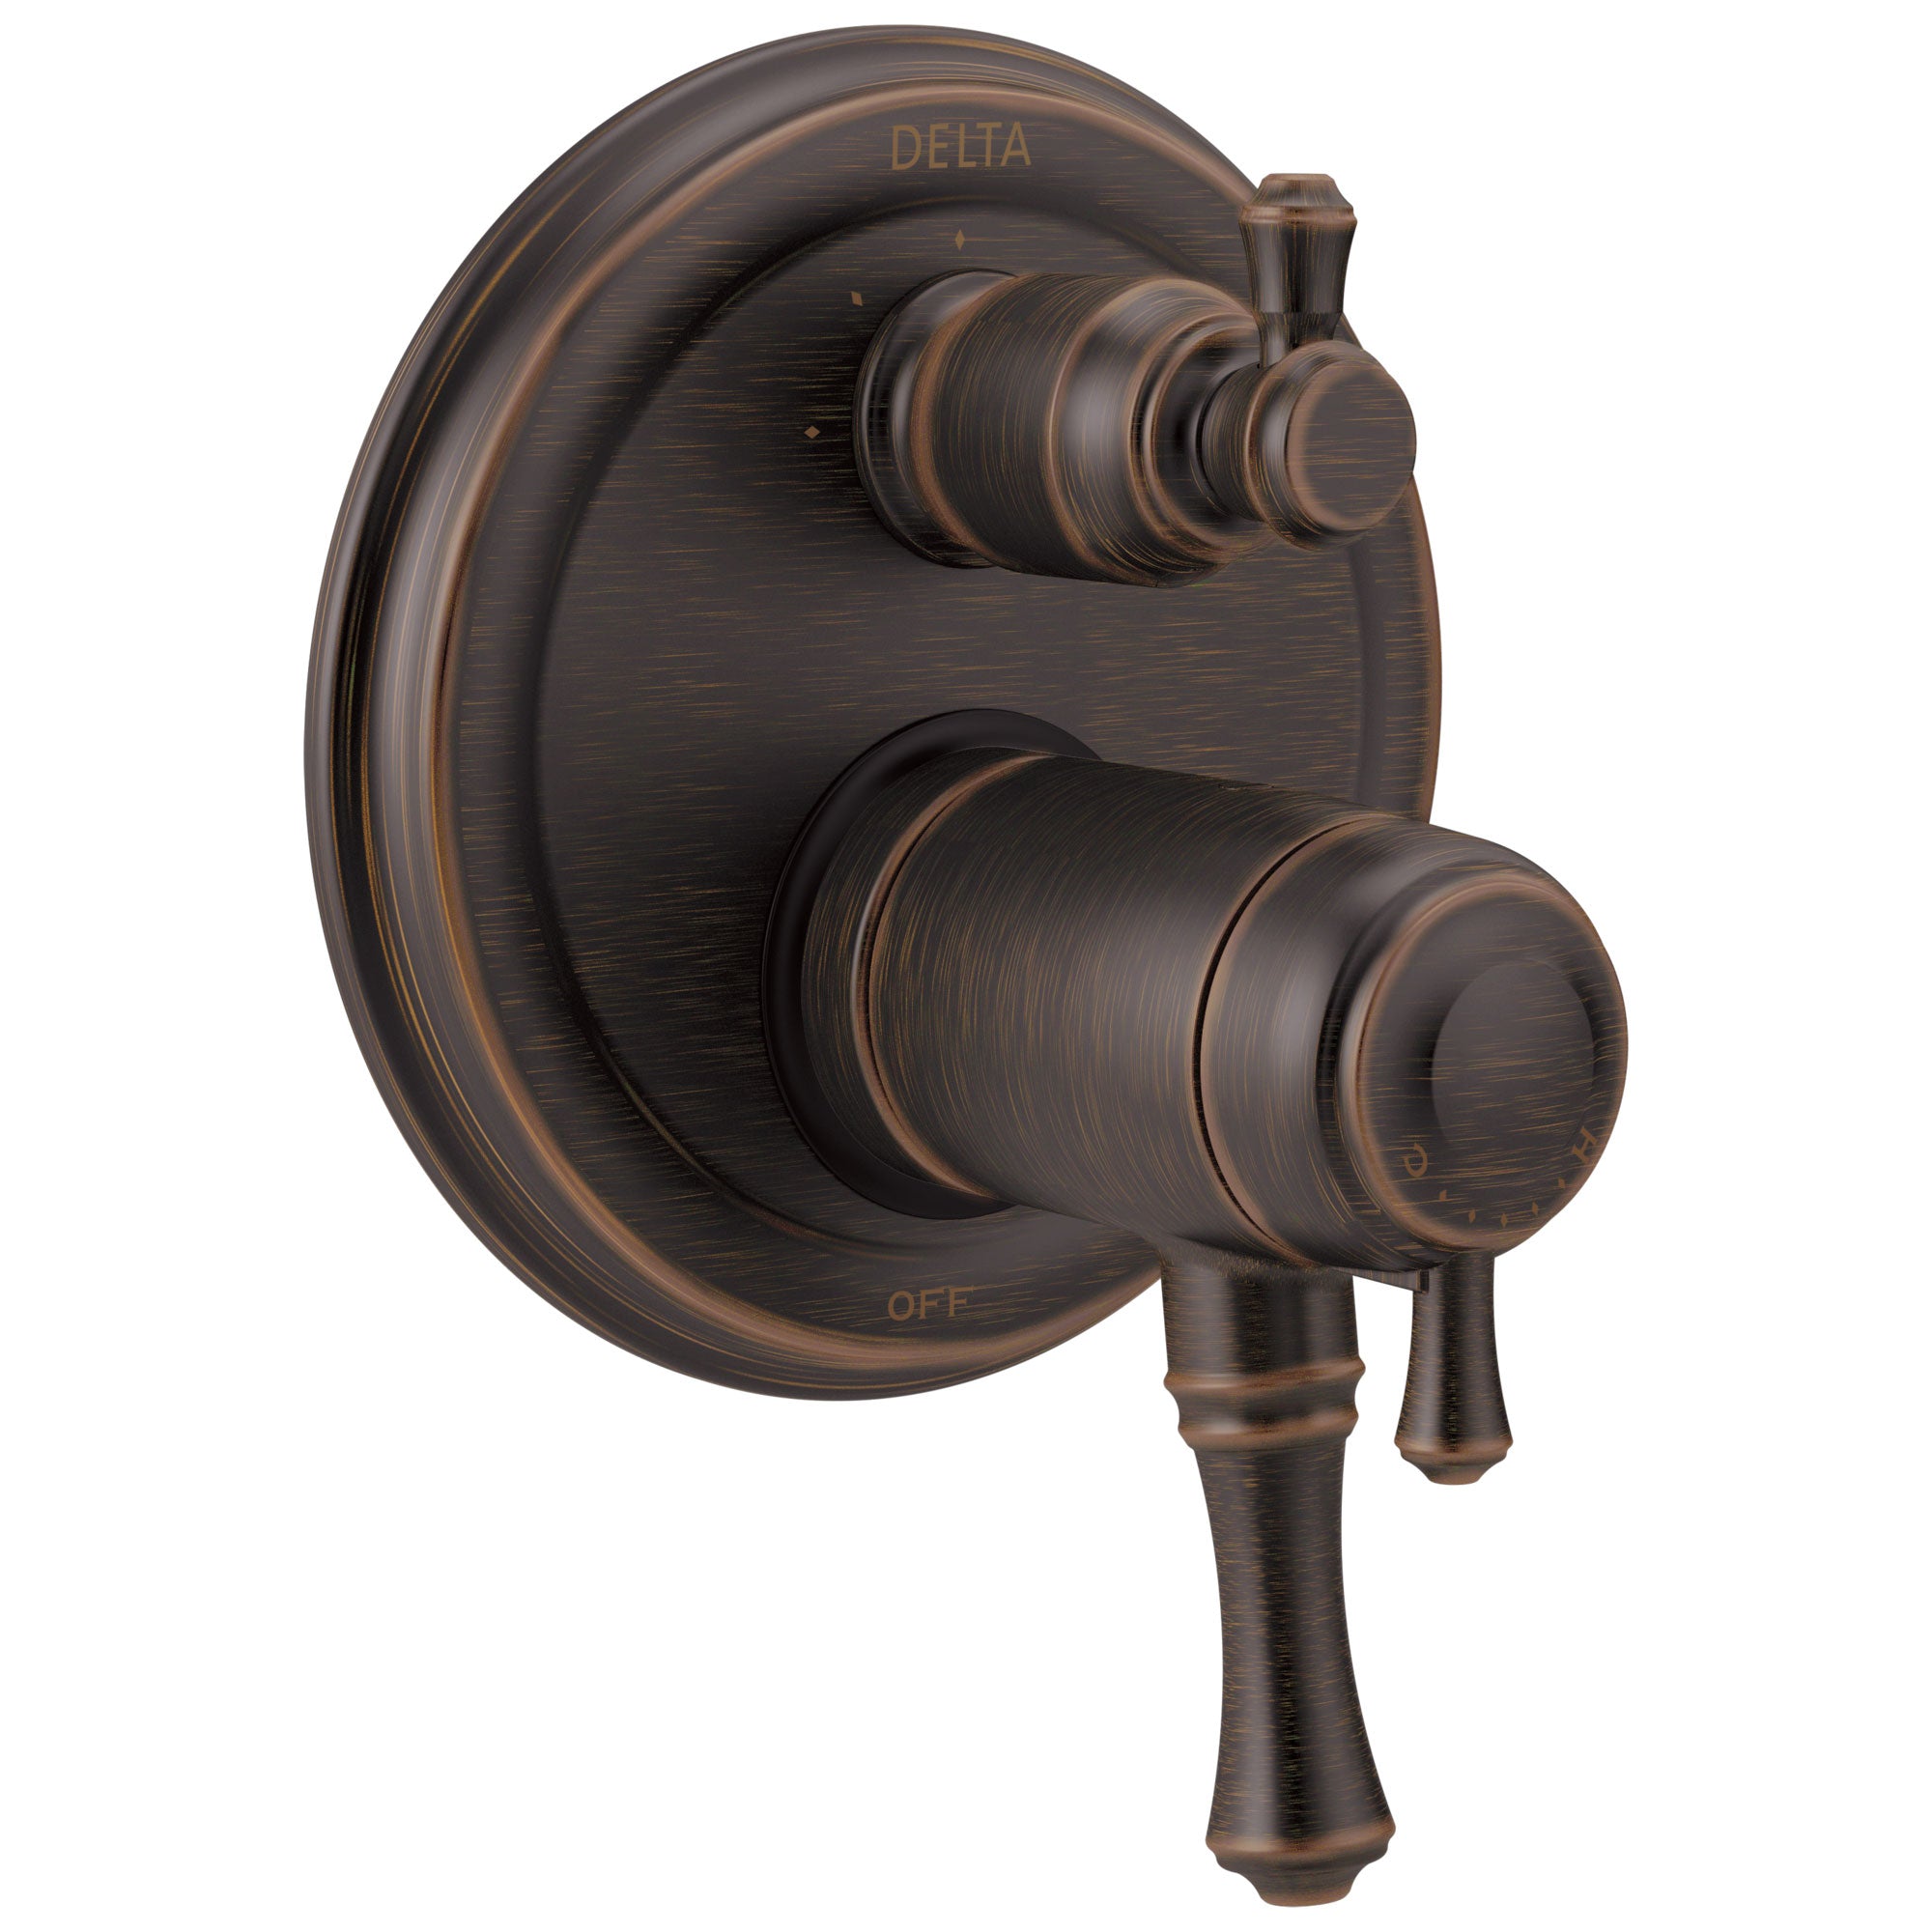 Delta Cassidy Collection Venetian Bronze Thermostatic Shower Faucet Control Handle with 3-Setting Integrated Diverter Trim (Requires Valve) DT27T897RB